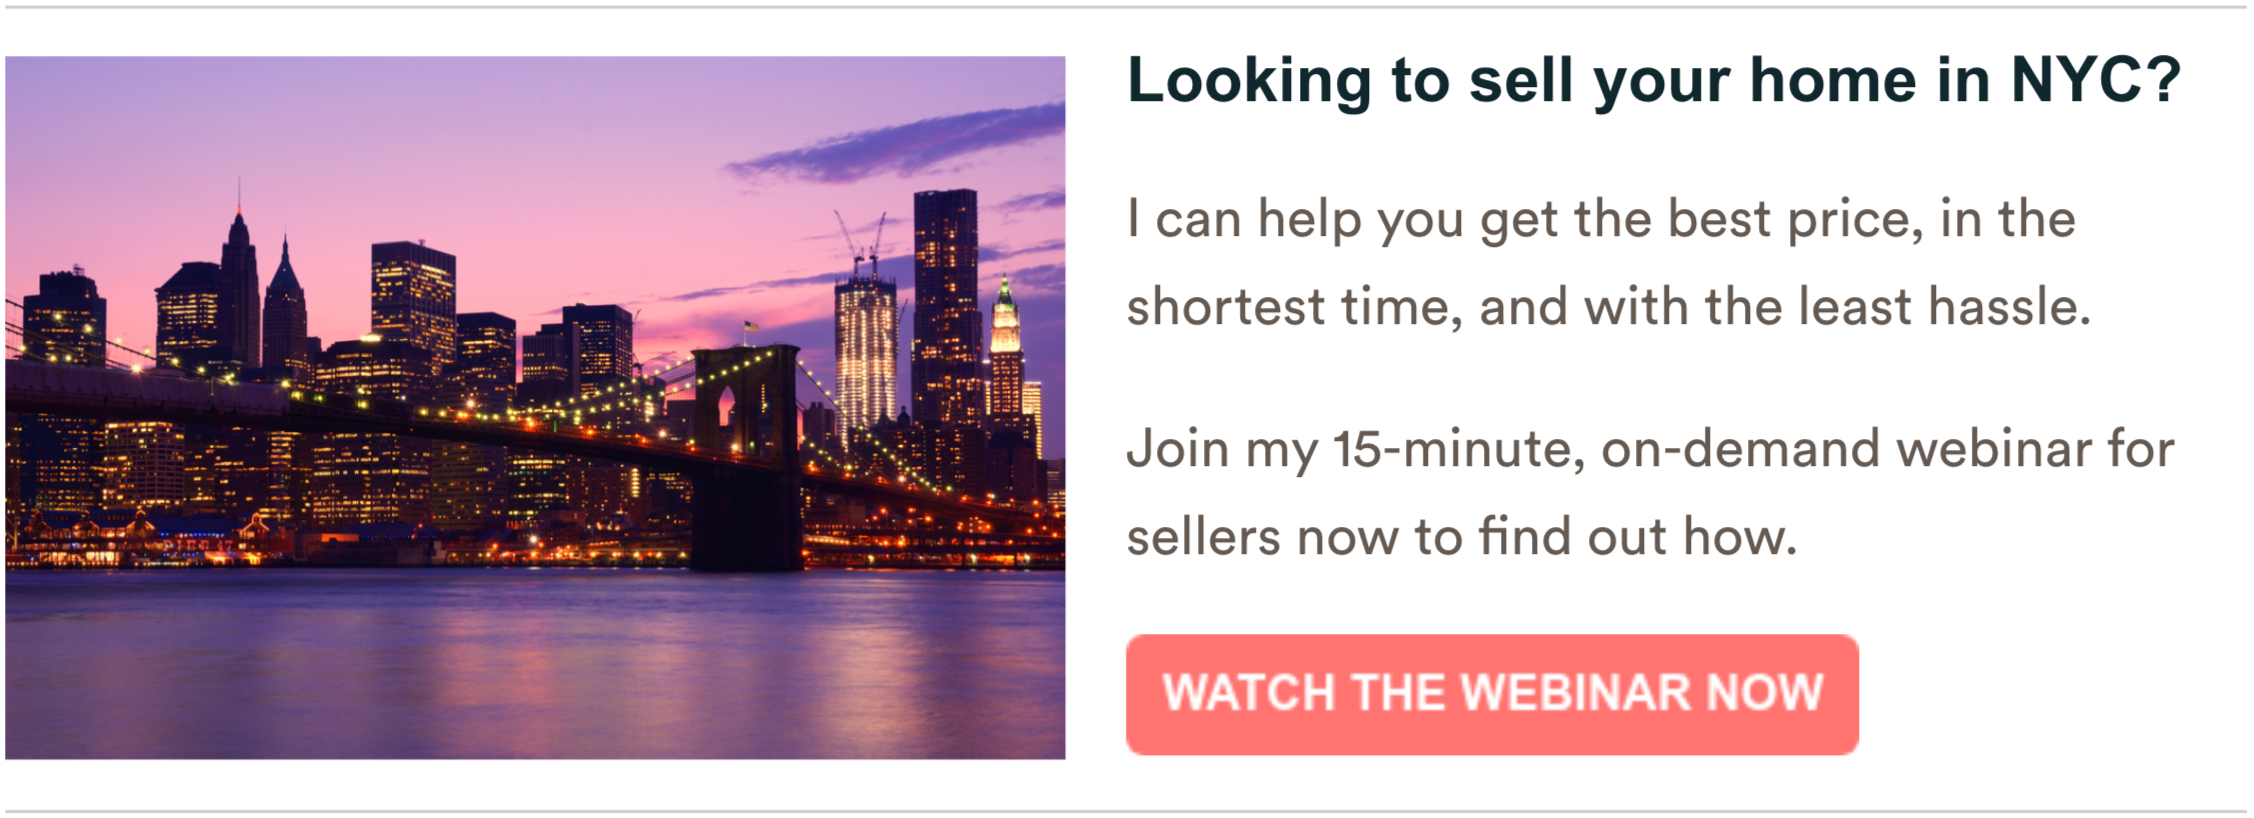 looking to sell in nyc banner ad